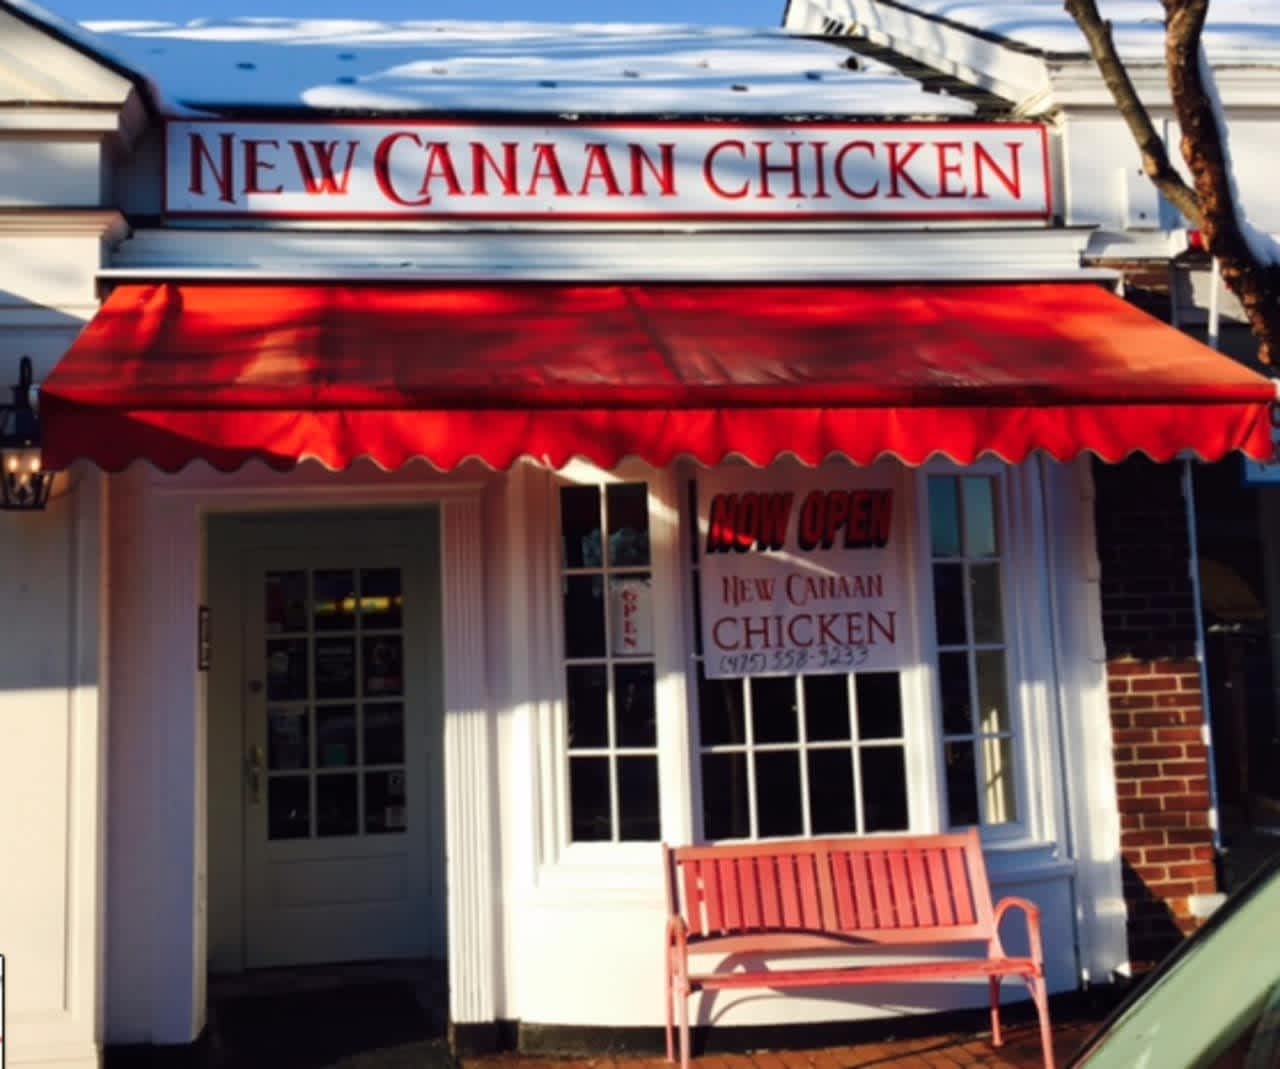 New Canaan Chicken, located at 151 Elm Street